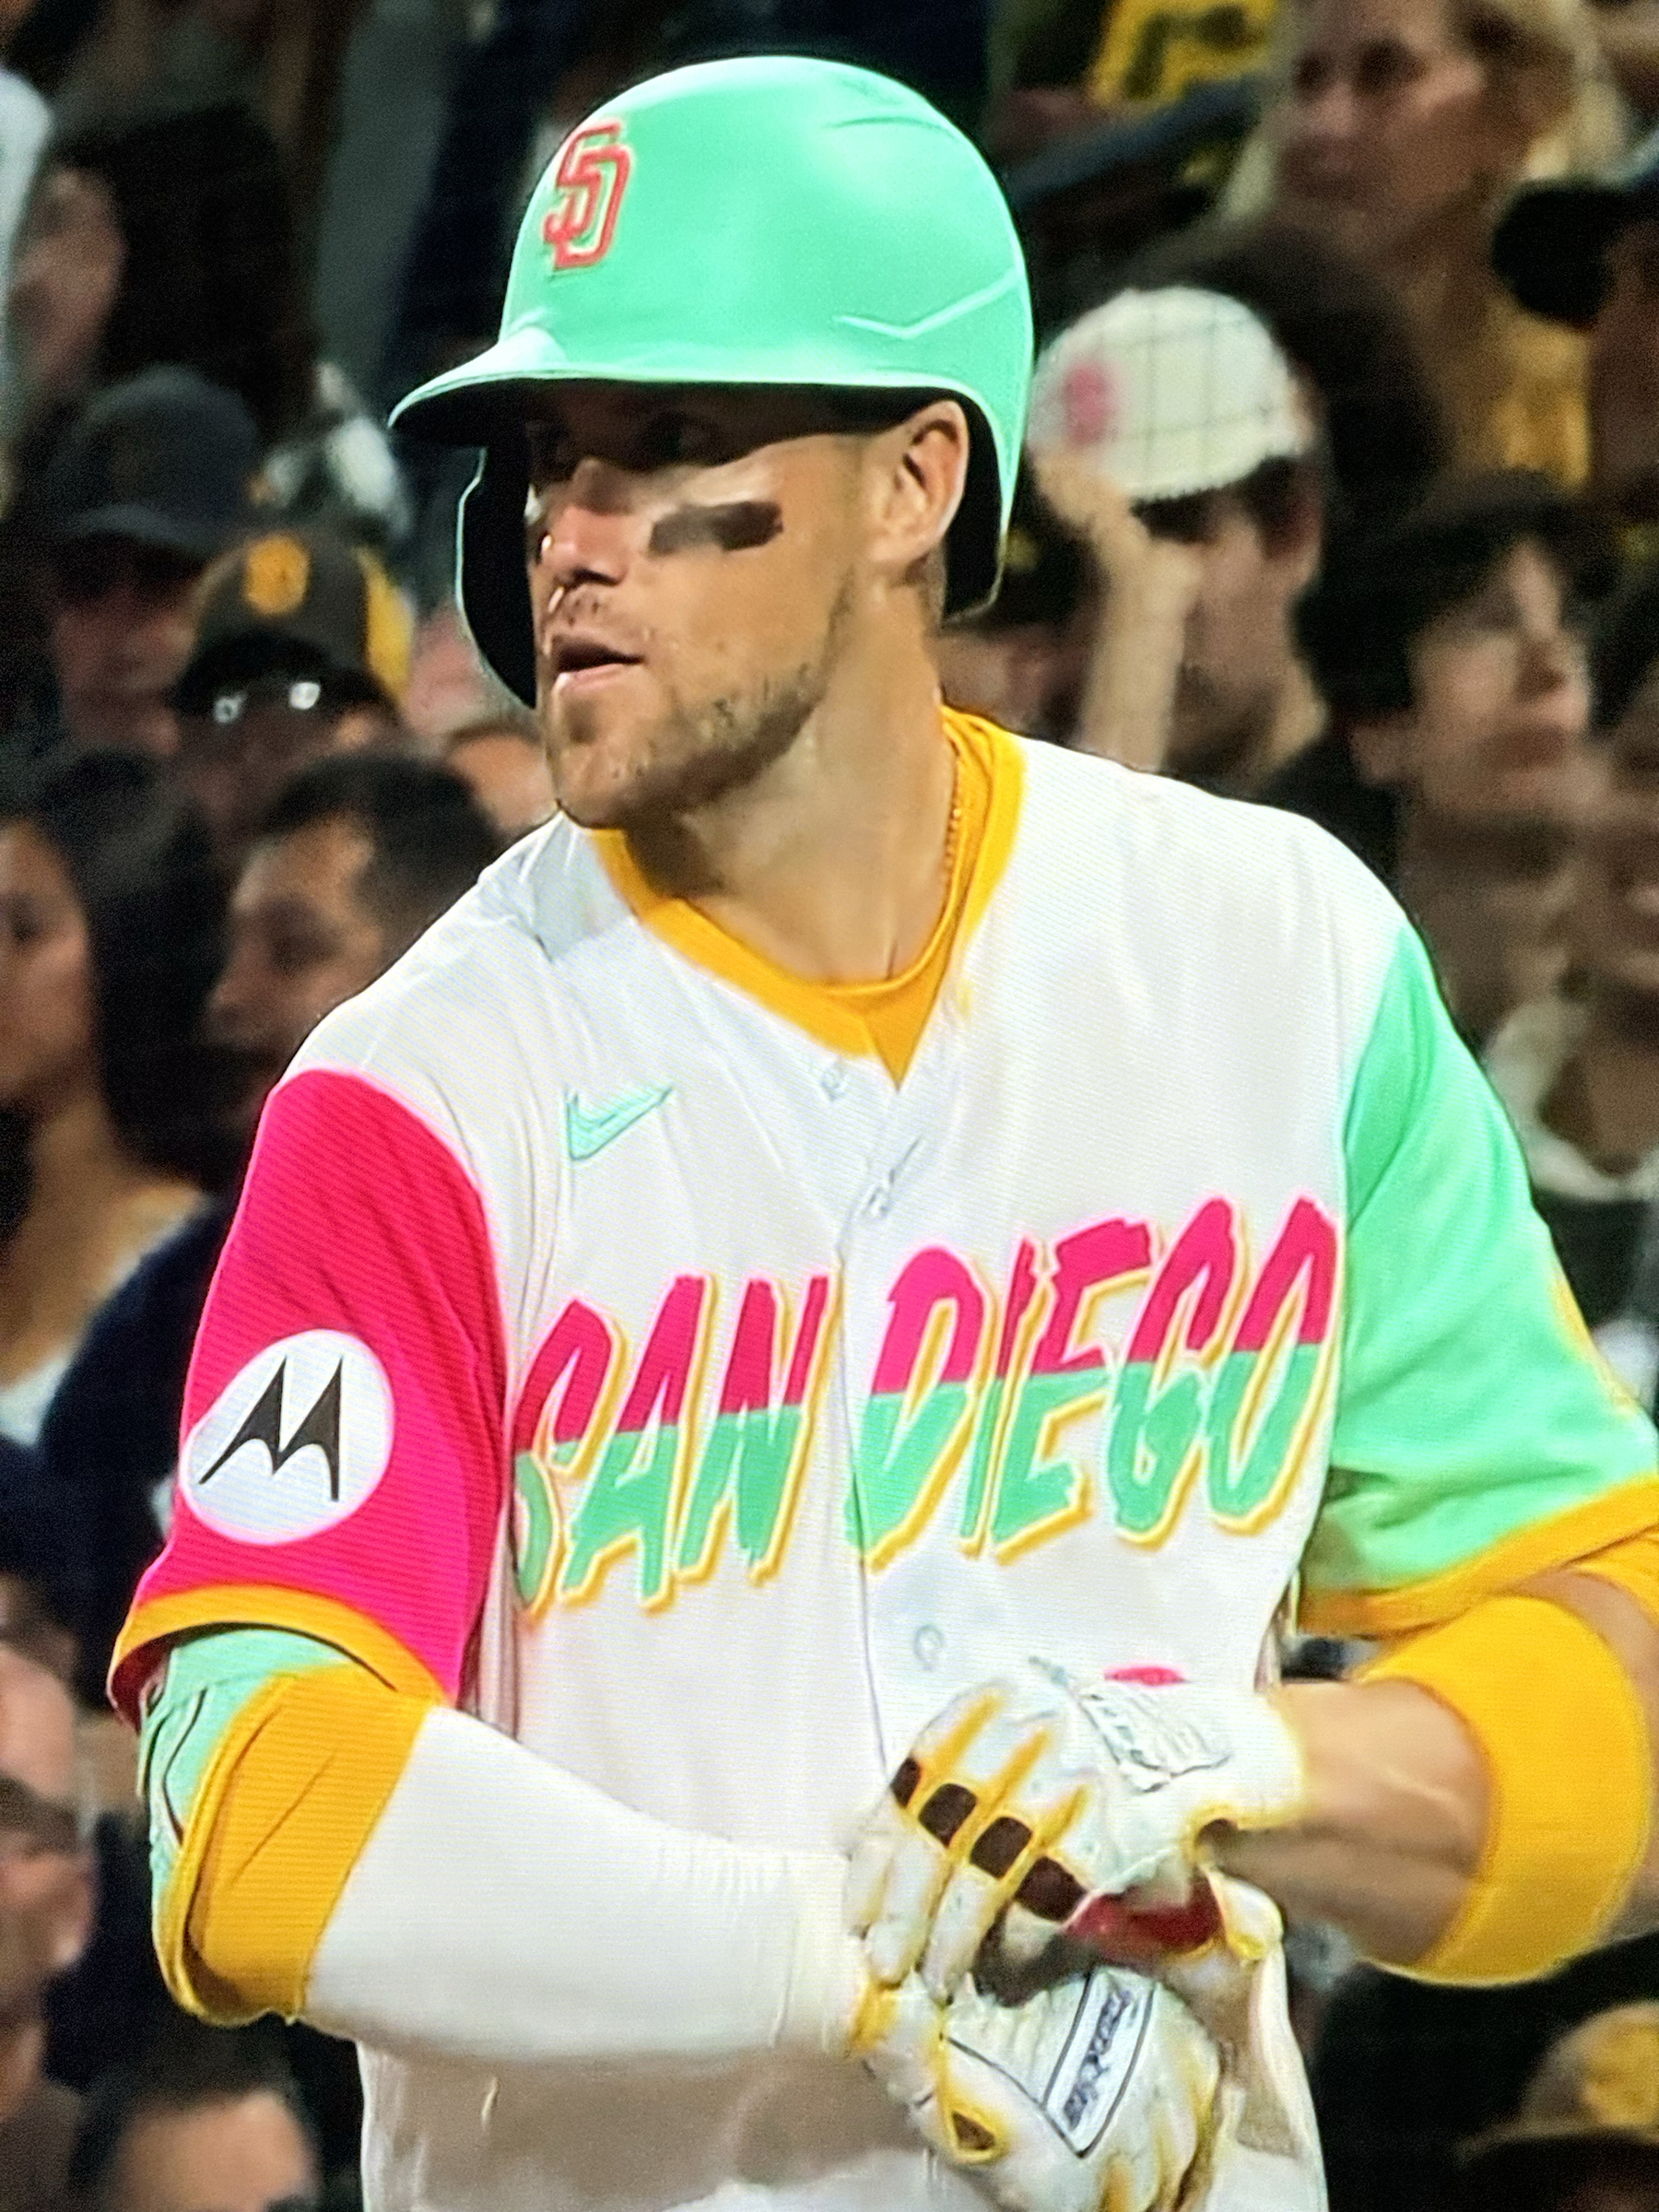 San Diego Padres uniform that is a unique shade of teal and fuchsia (I’m not kidding)